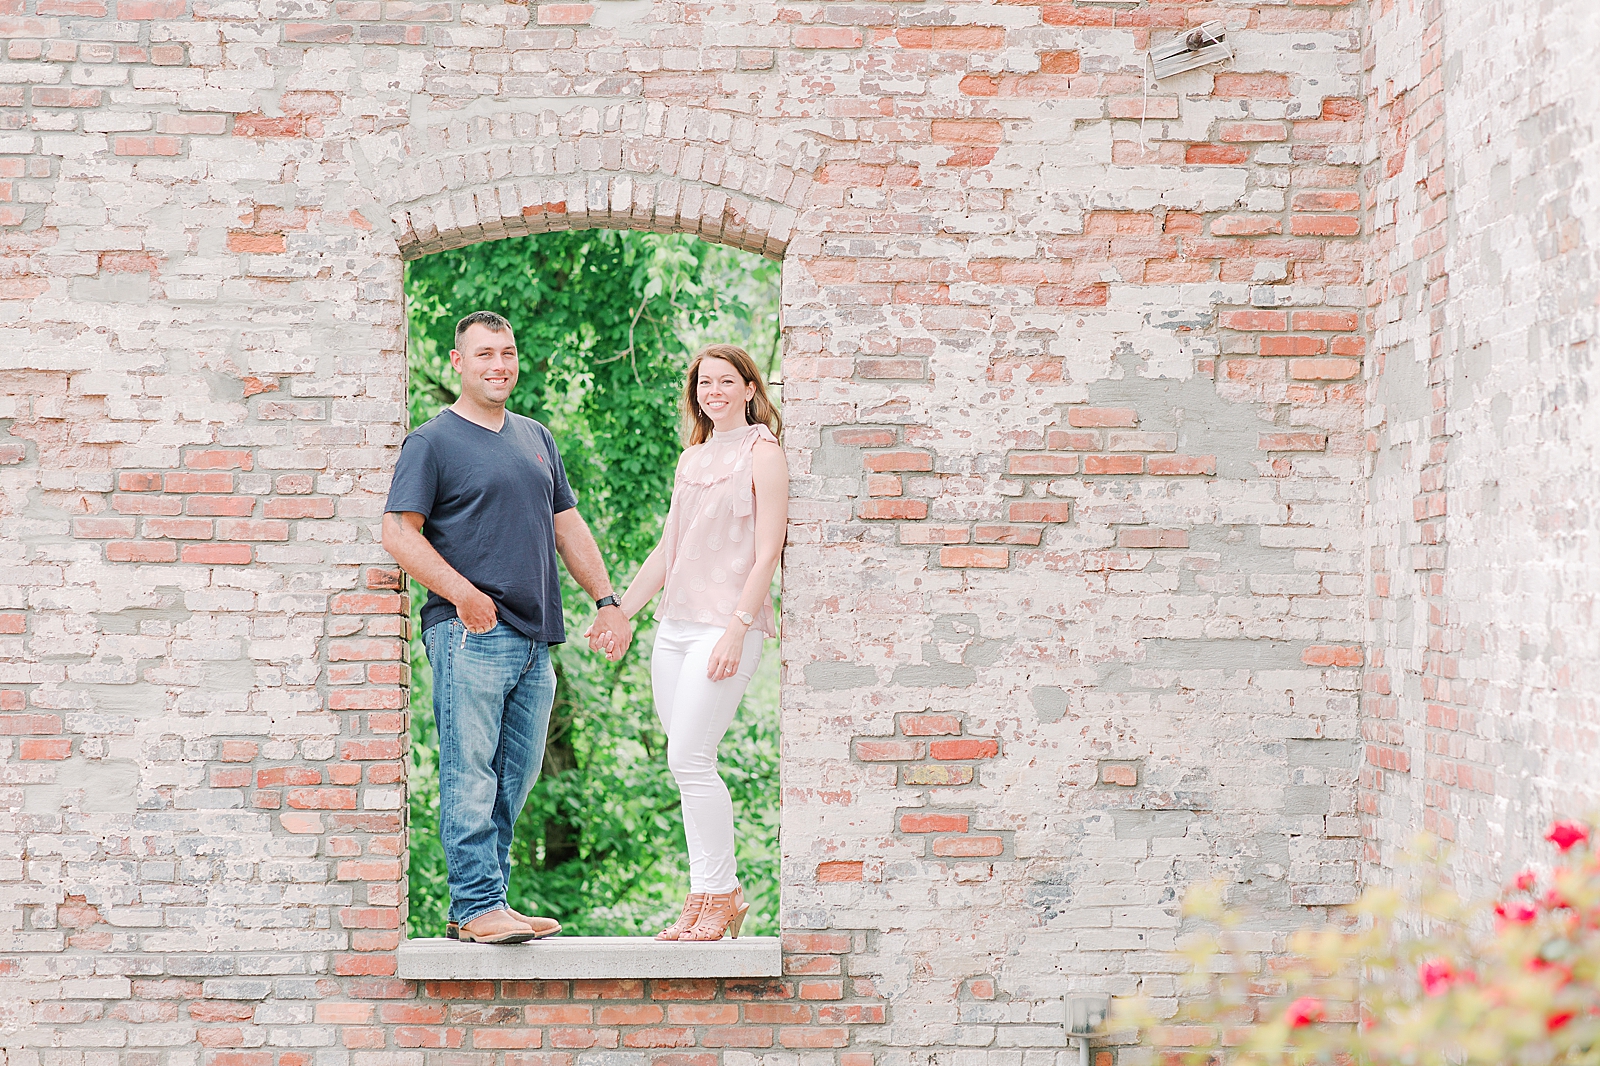 Hackney Warehouse Engagement Session Couple standing in brick archway Photo